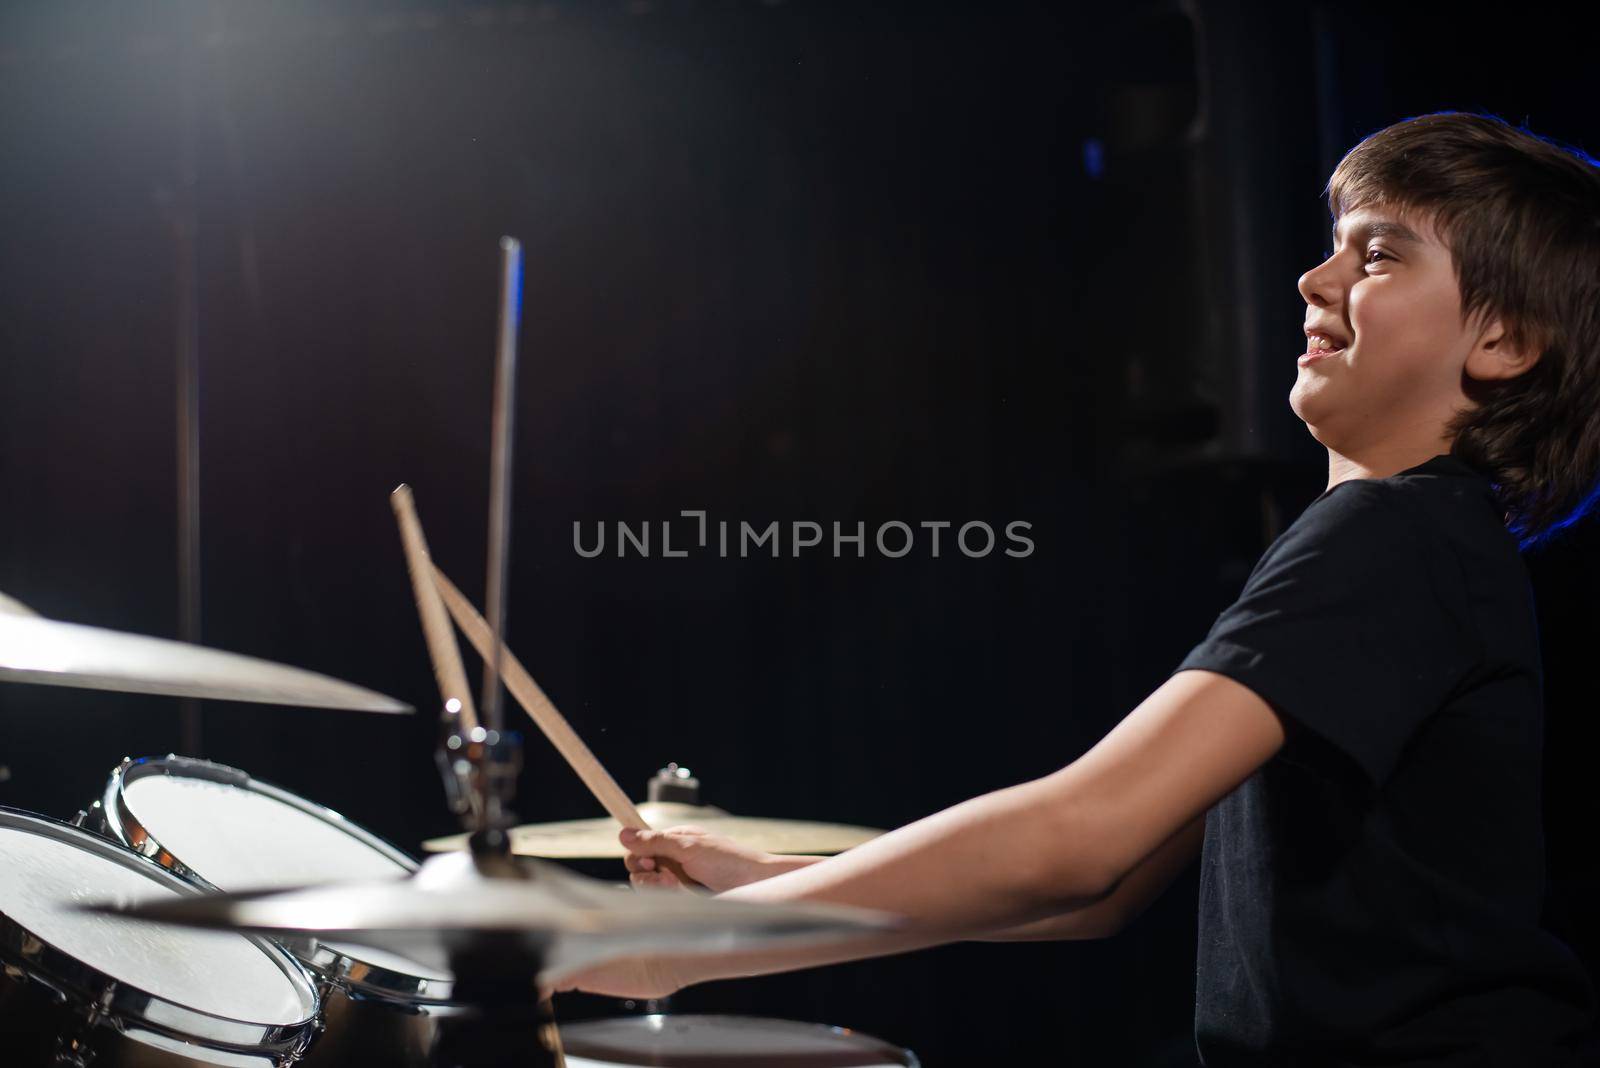 A boy plays drums in a recording studio.